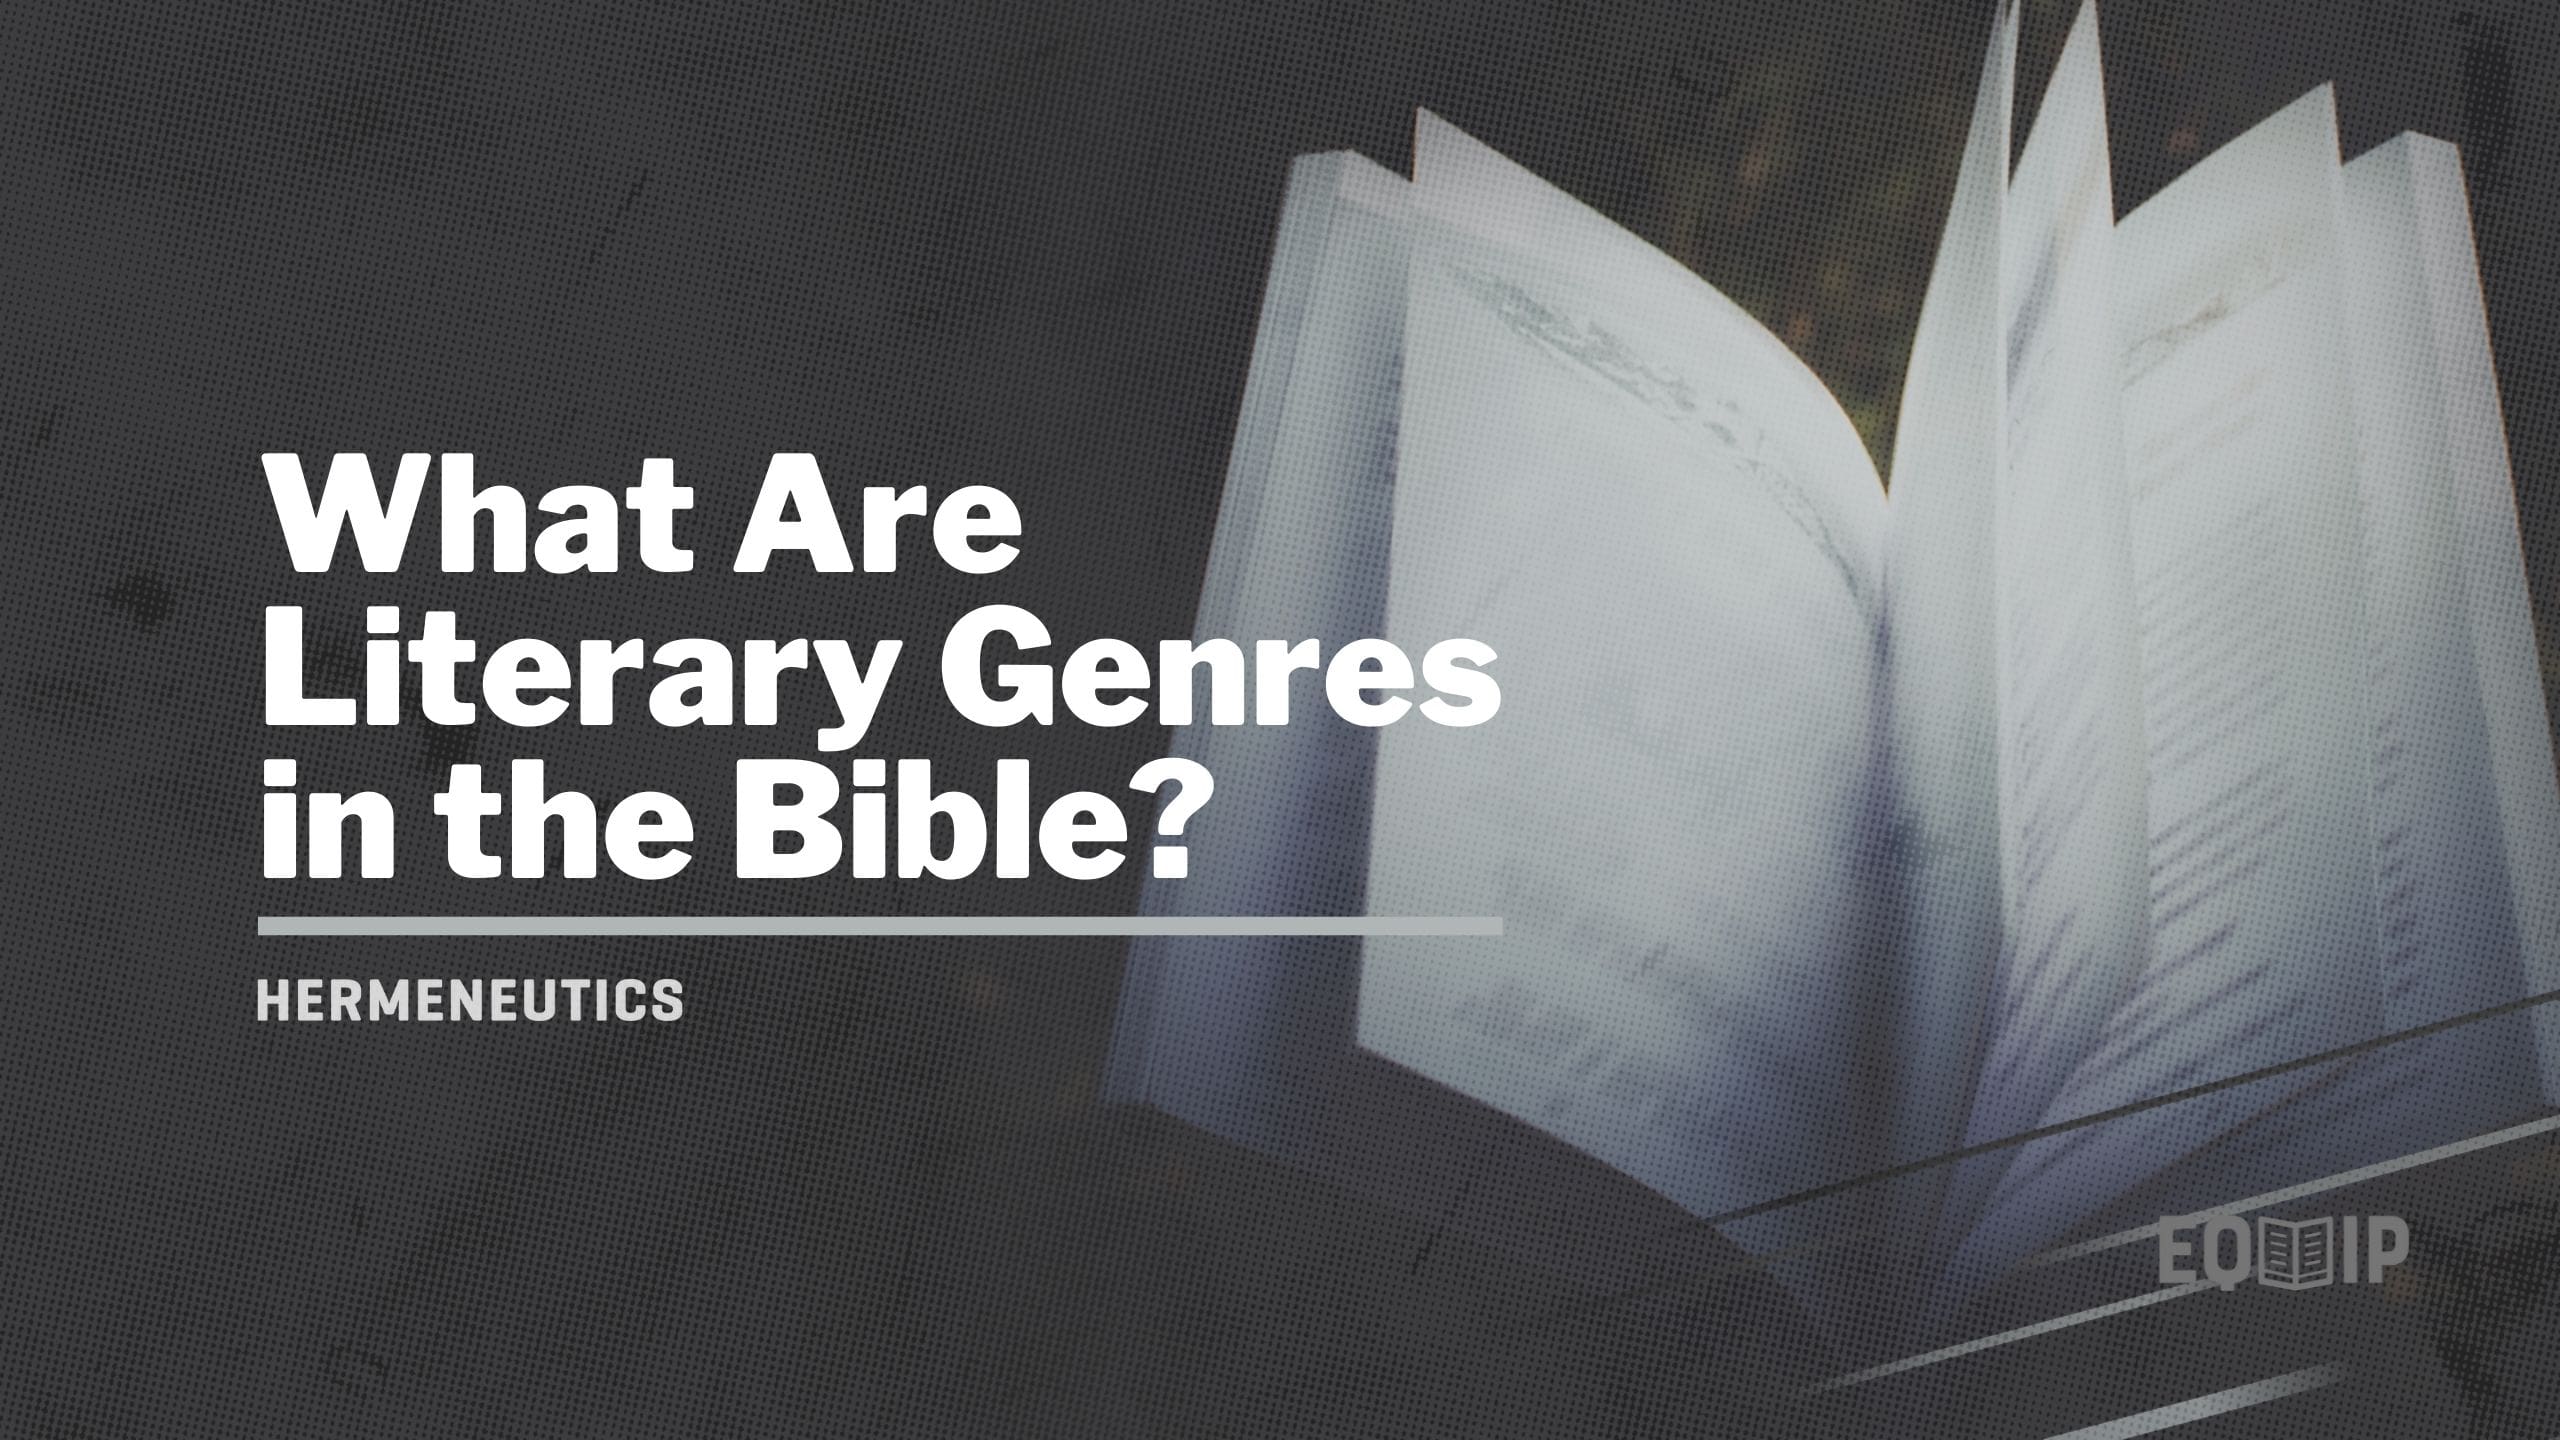 What Are Literary Genres in the Bible?